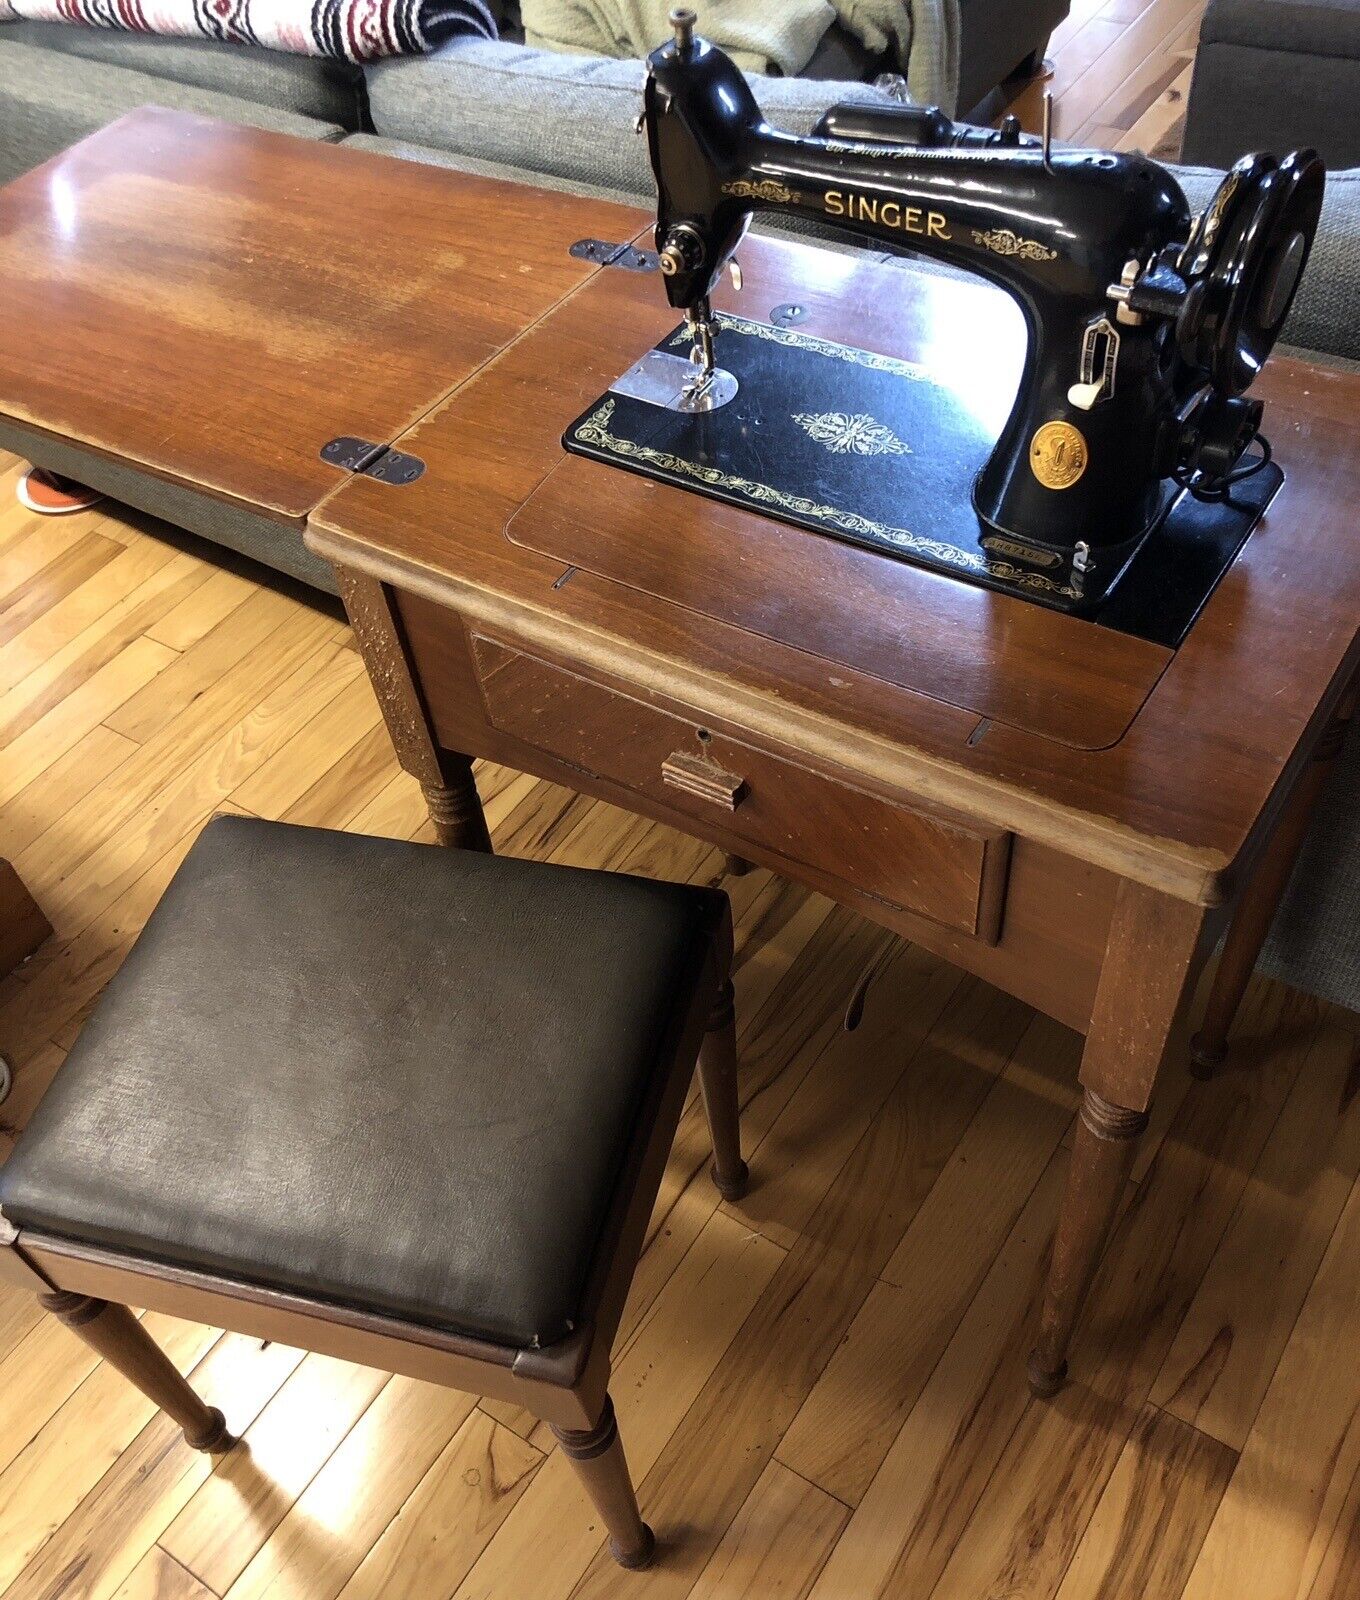 Singer Model 66 Series AH Sewing Machine 1948 - Works w/ Table Bench & extras